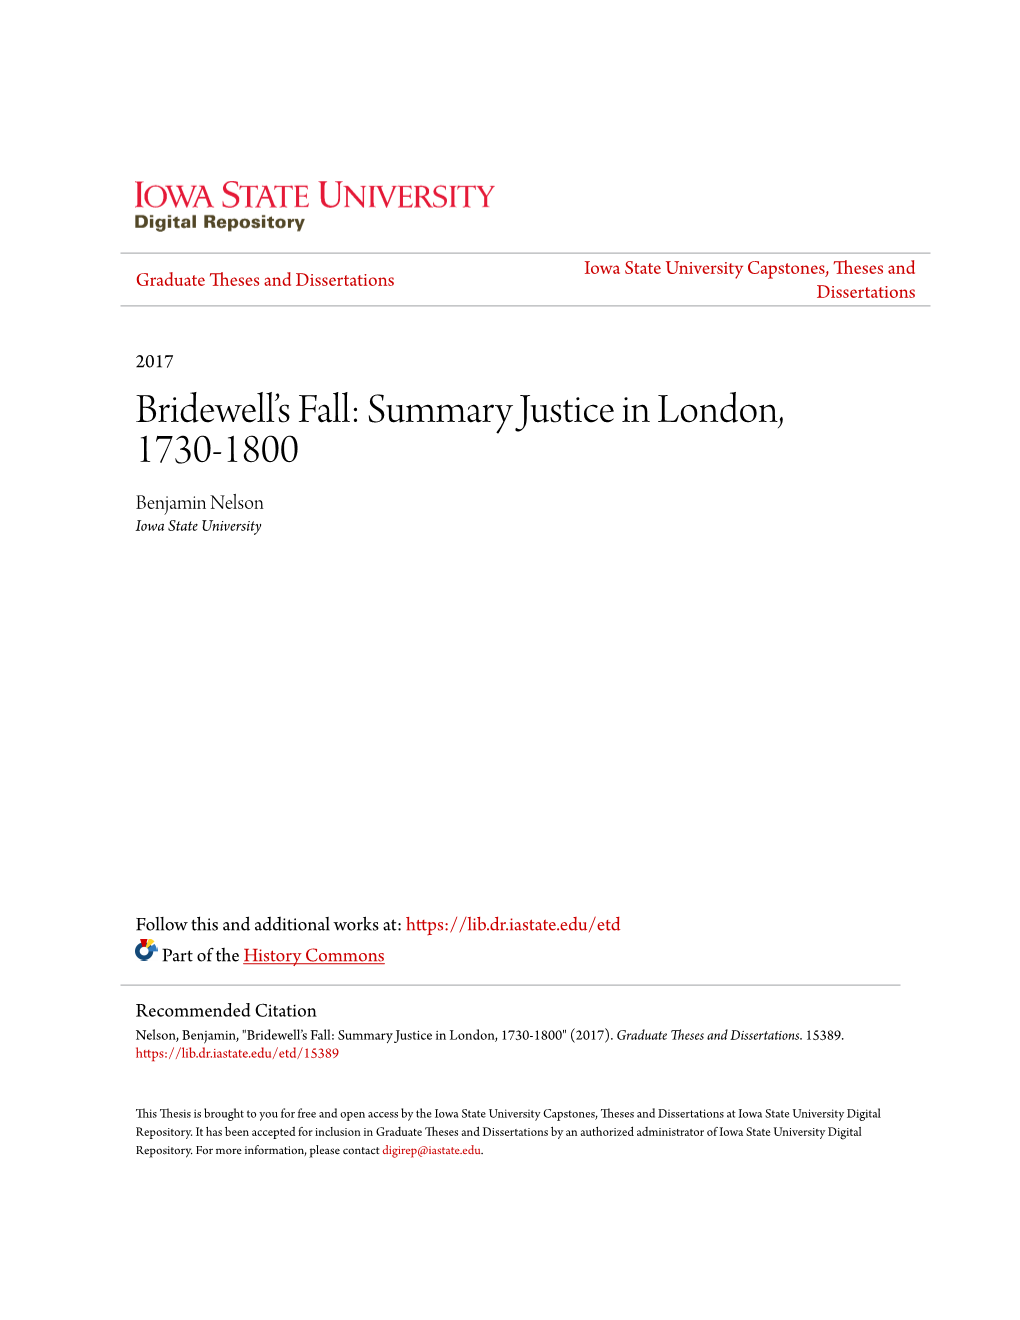 Bridewell's Fall: Summary Justice in London, 1730-1800